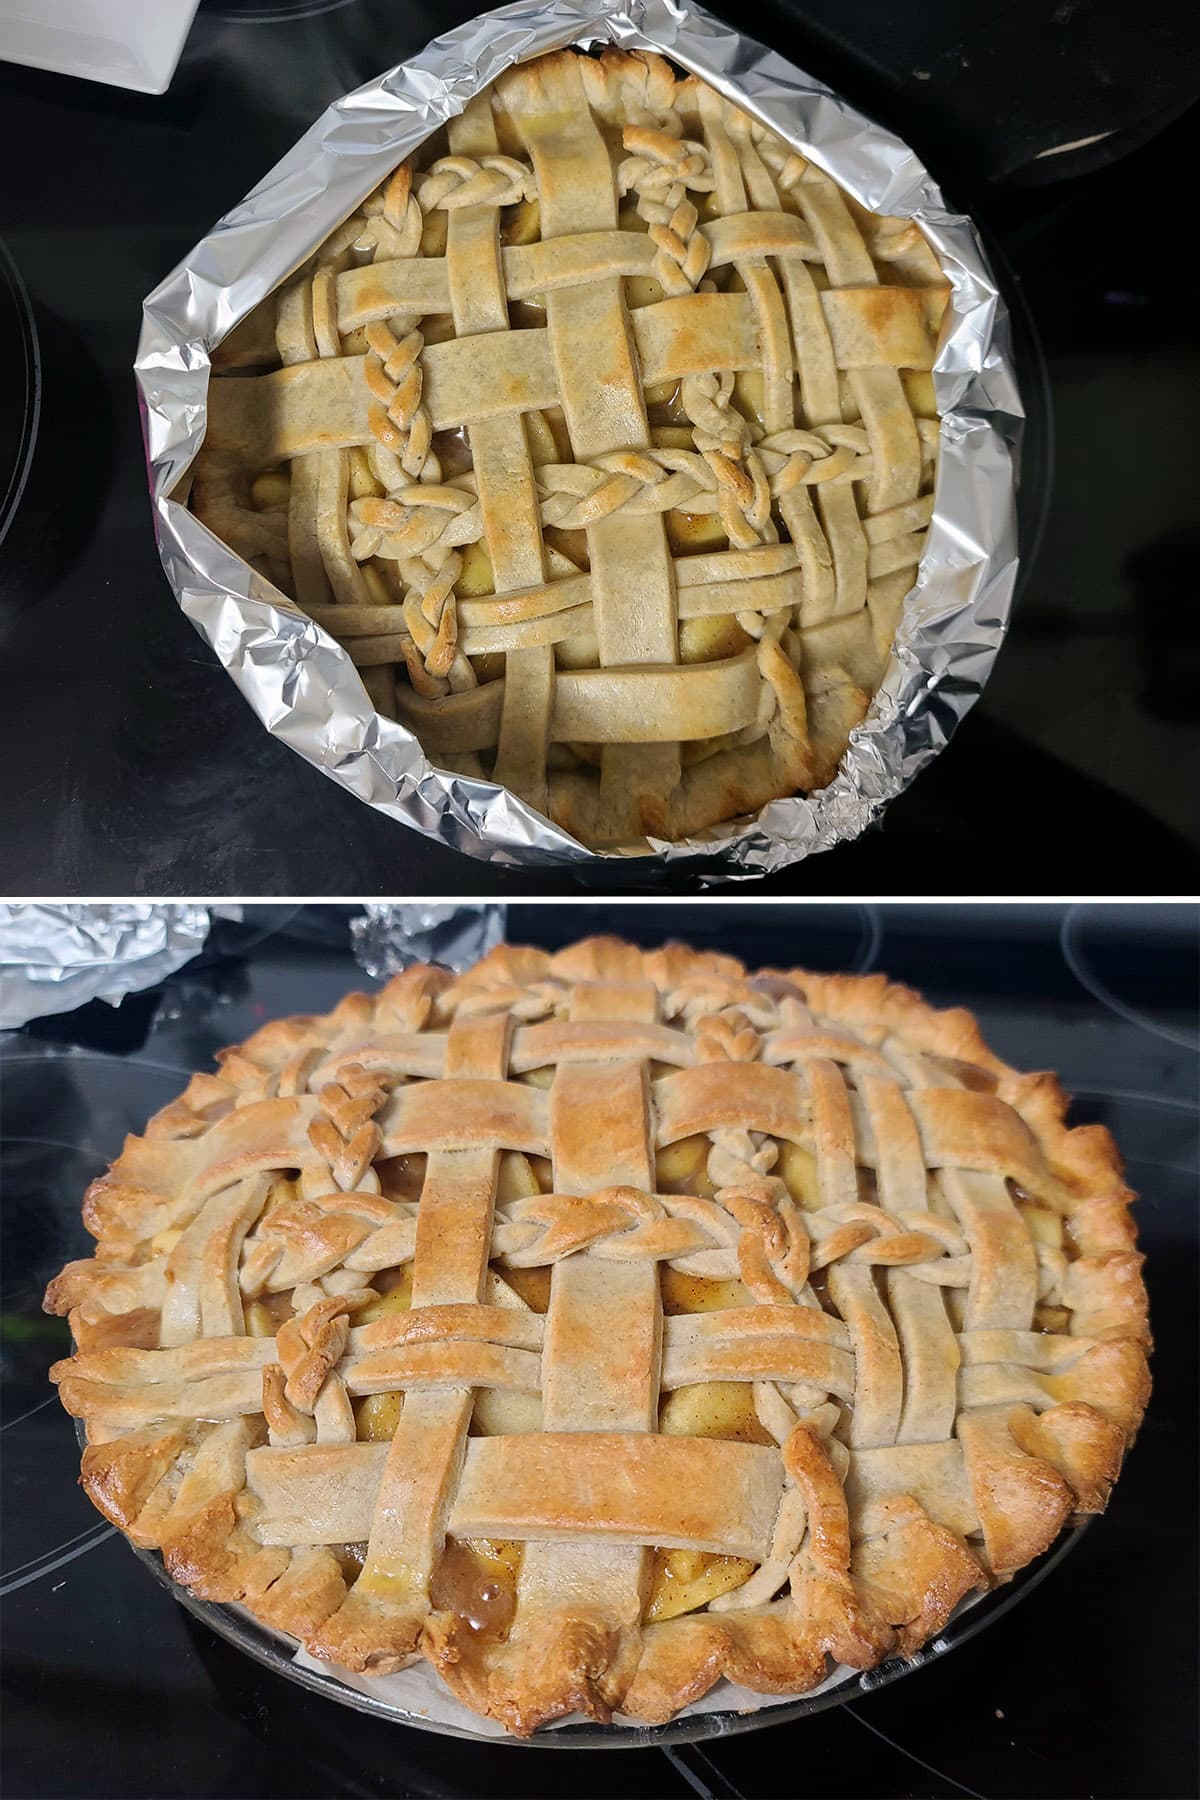 A 2 part image showing the outer edge of the pie wrapped with foil, then the finished baked pie.